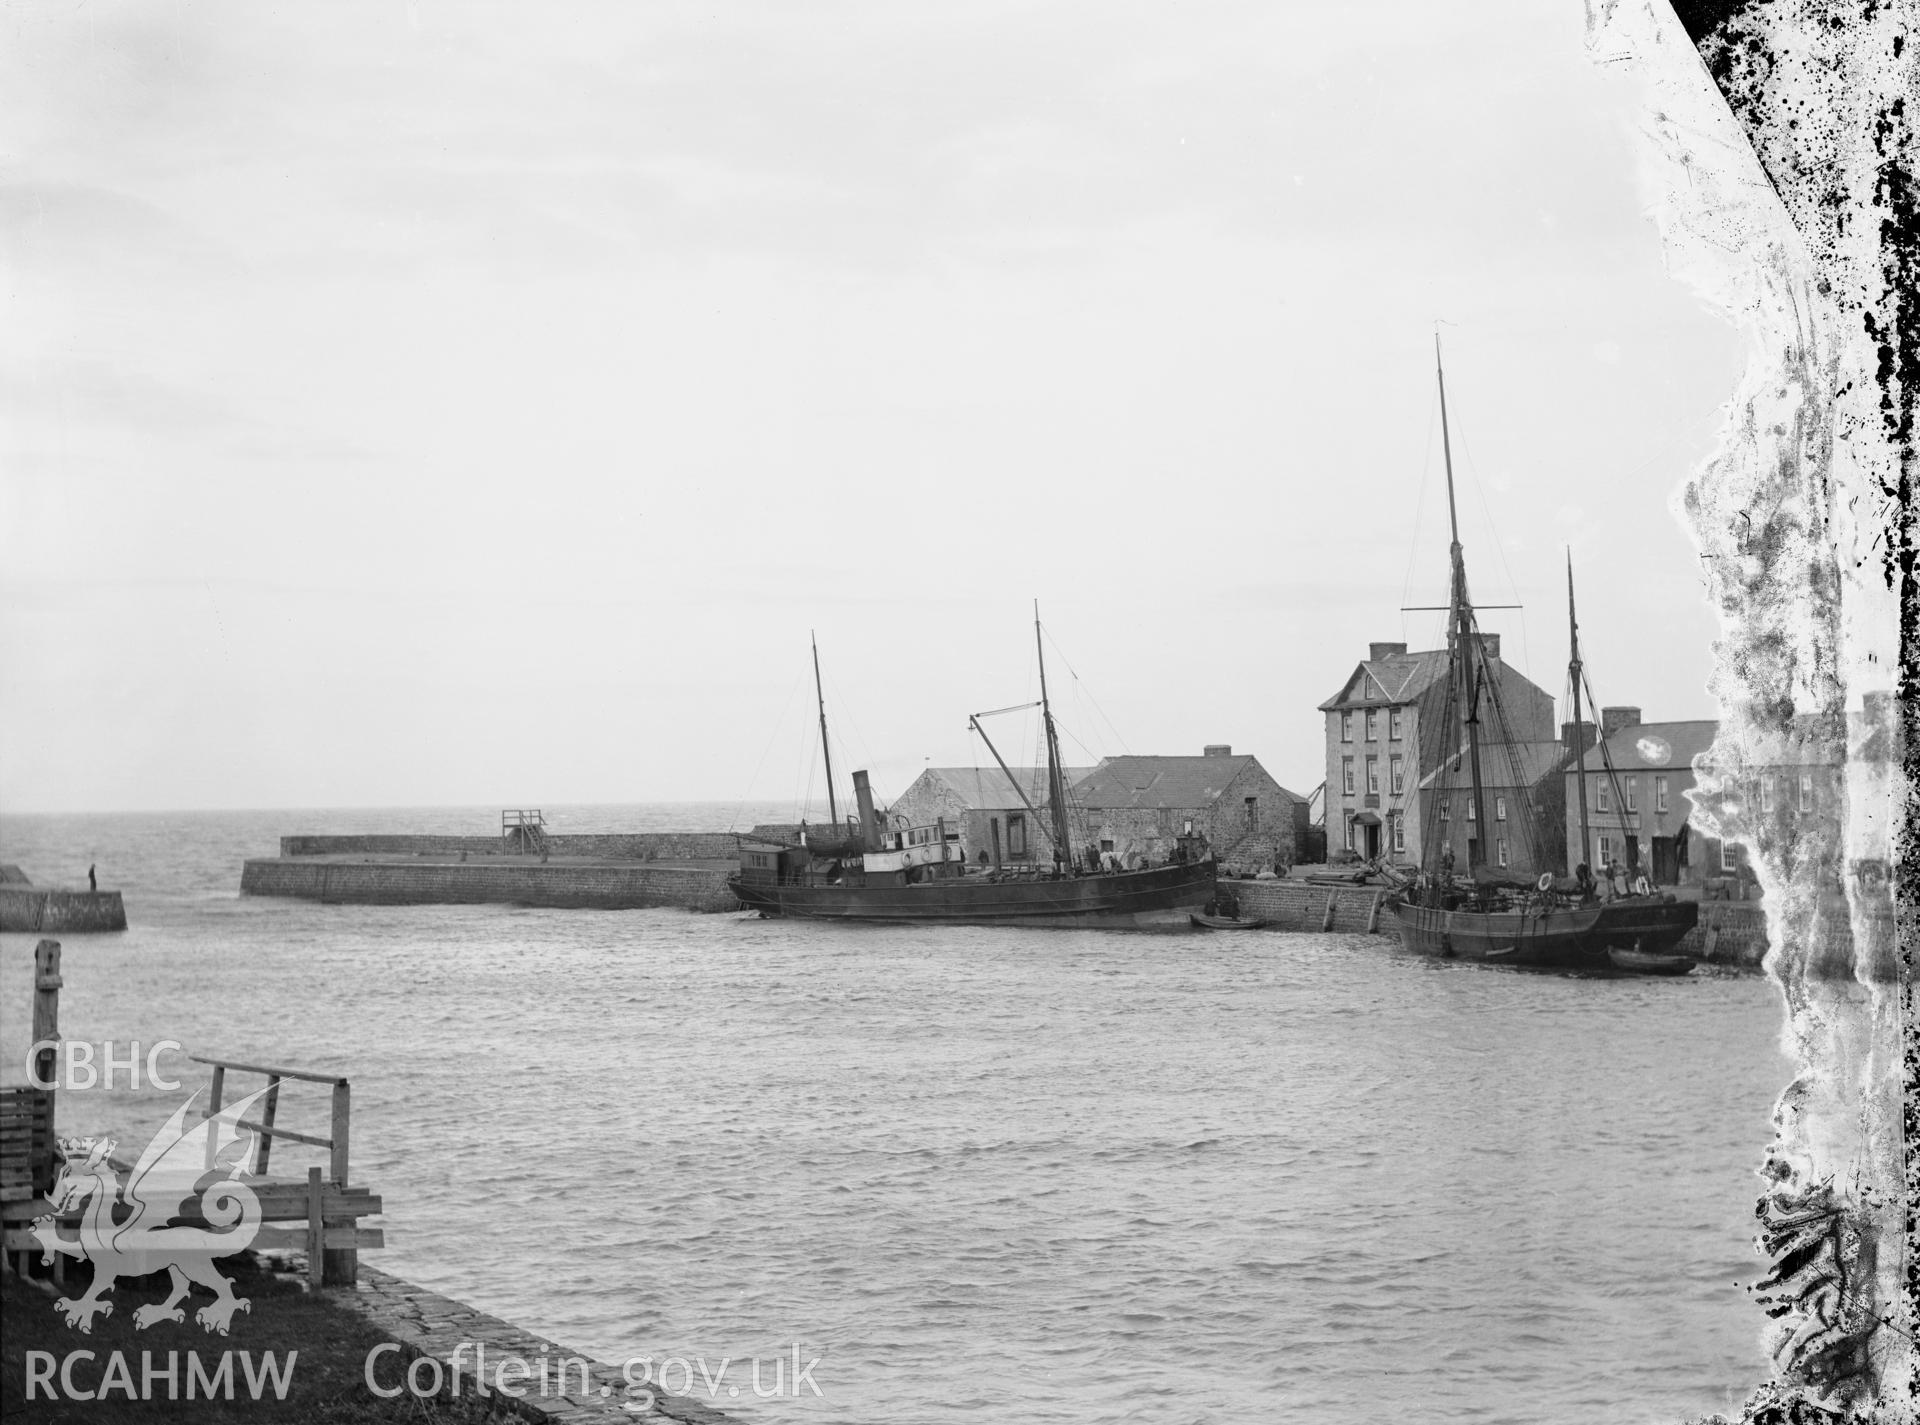 Black and white image dating from c.1910 showing the outer harbour in Aberaeron.